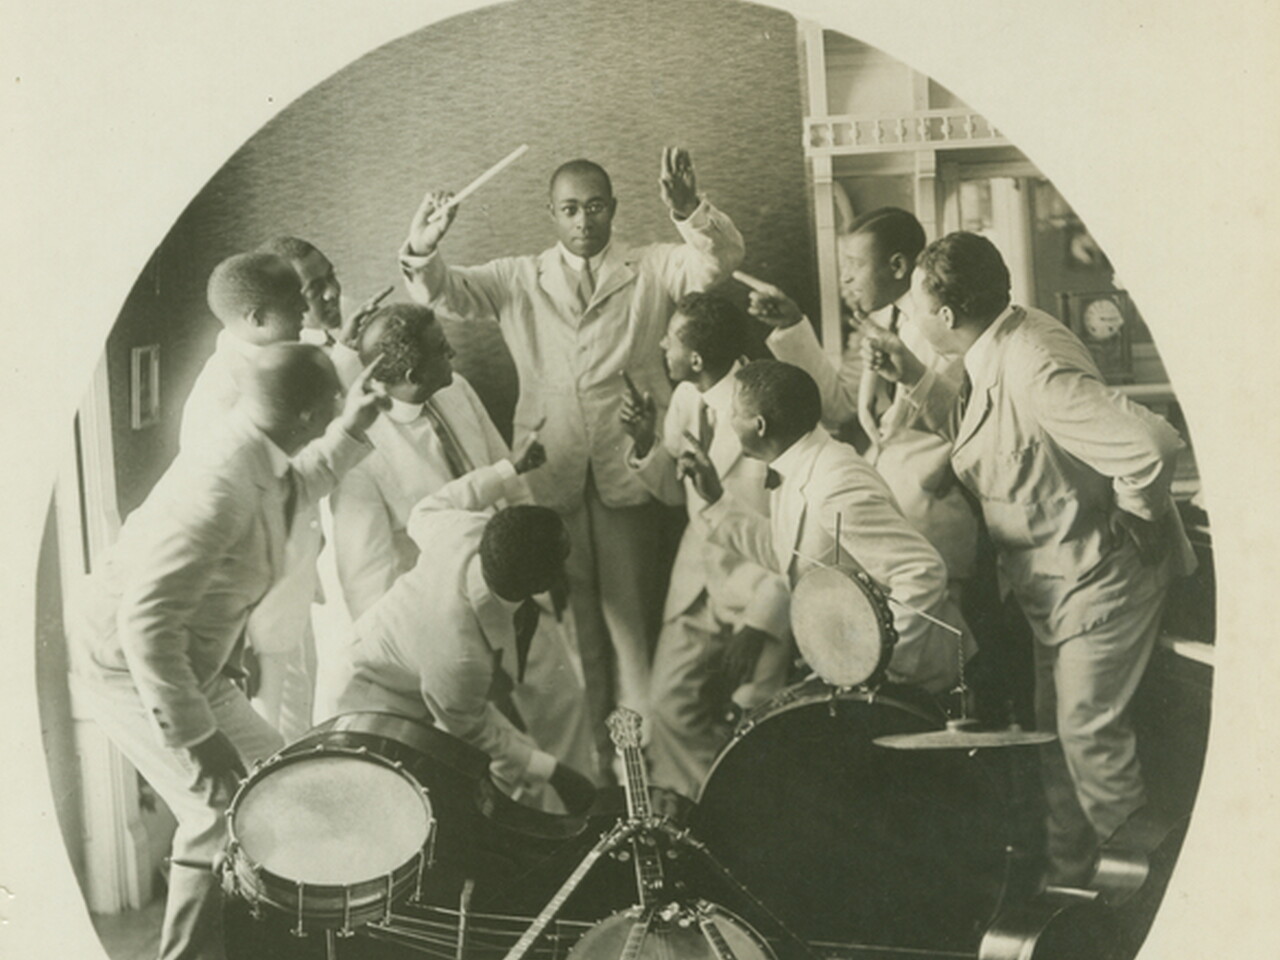 Photograph of James Reese with his band. He is shown conducting as the band members point at him.